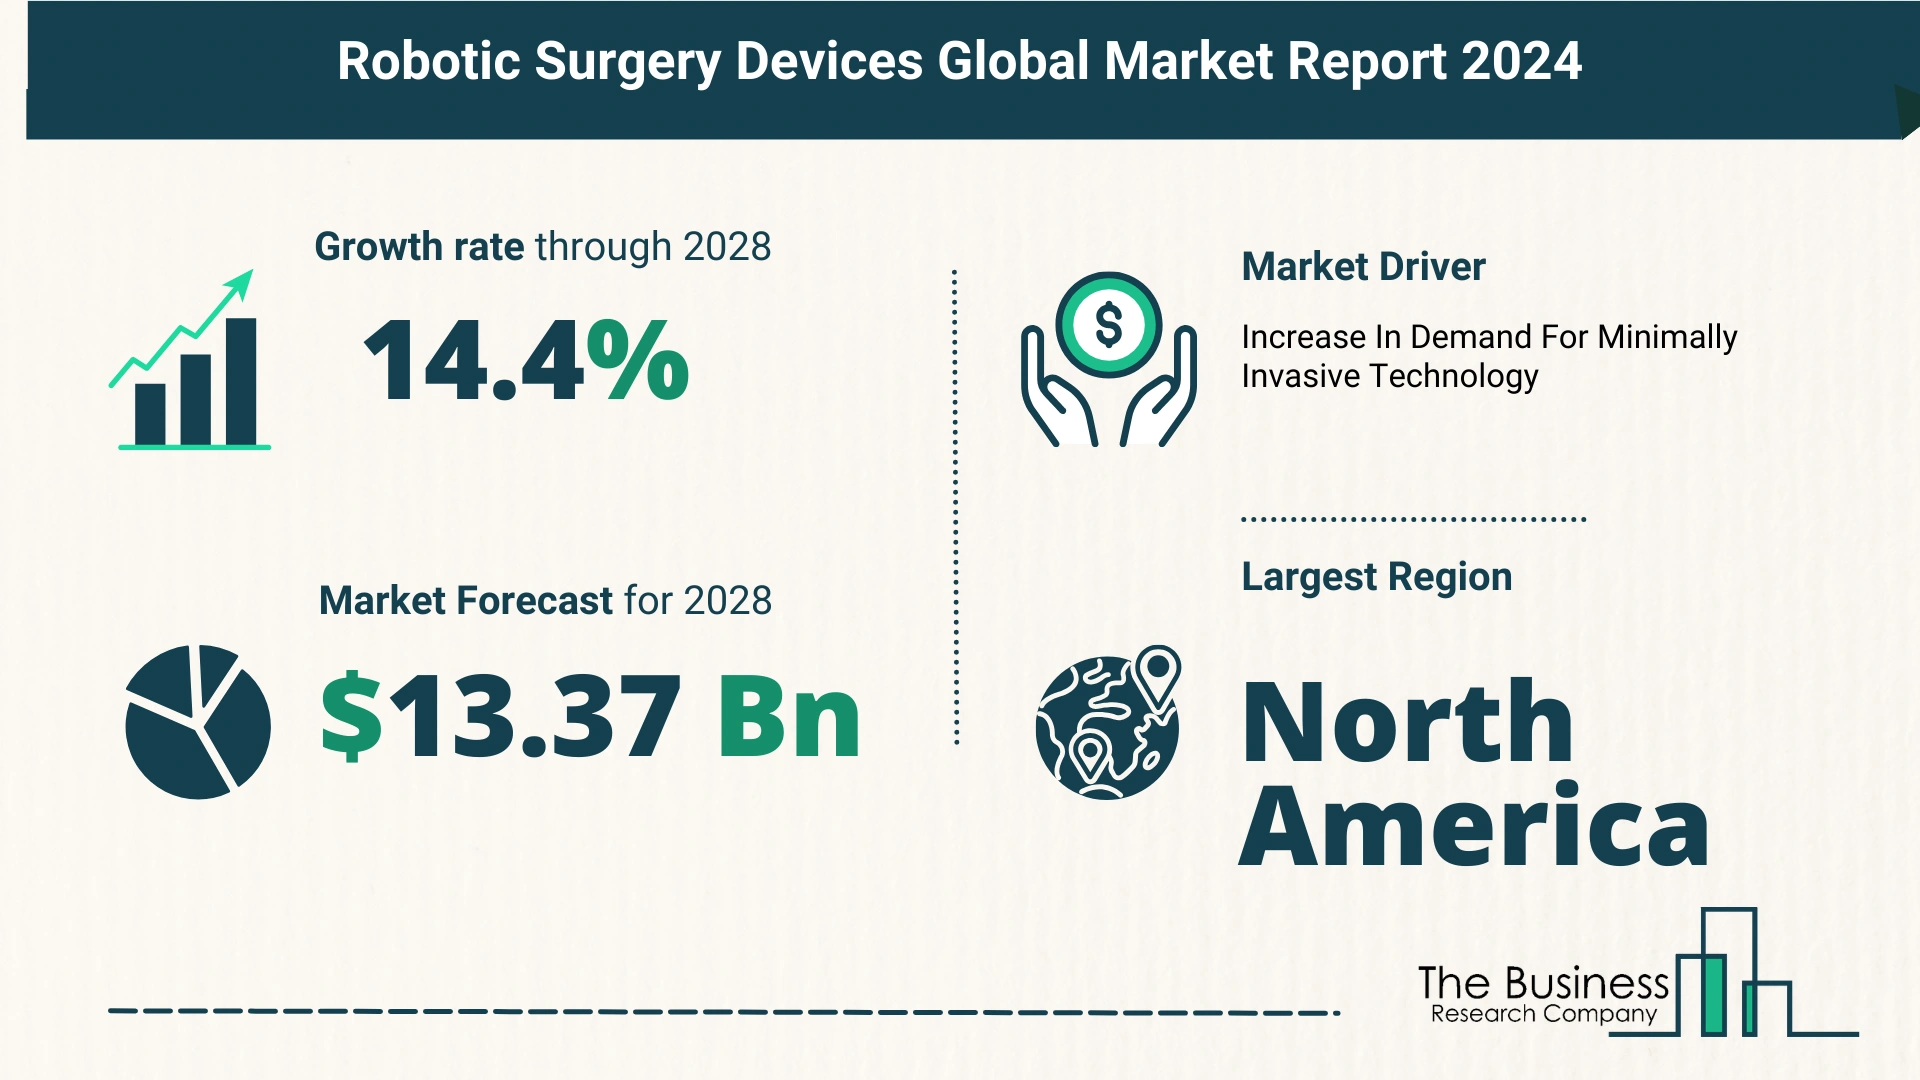 Key Takeaways From The Global Robotic Surgery Devices Market Forecast 2024